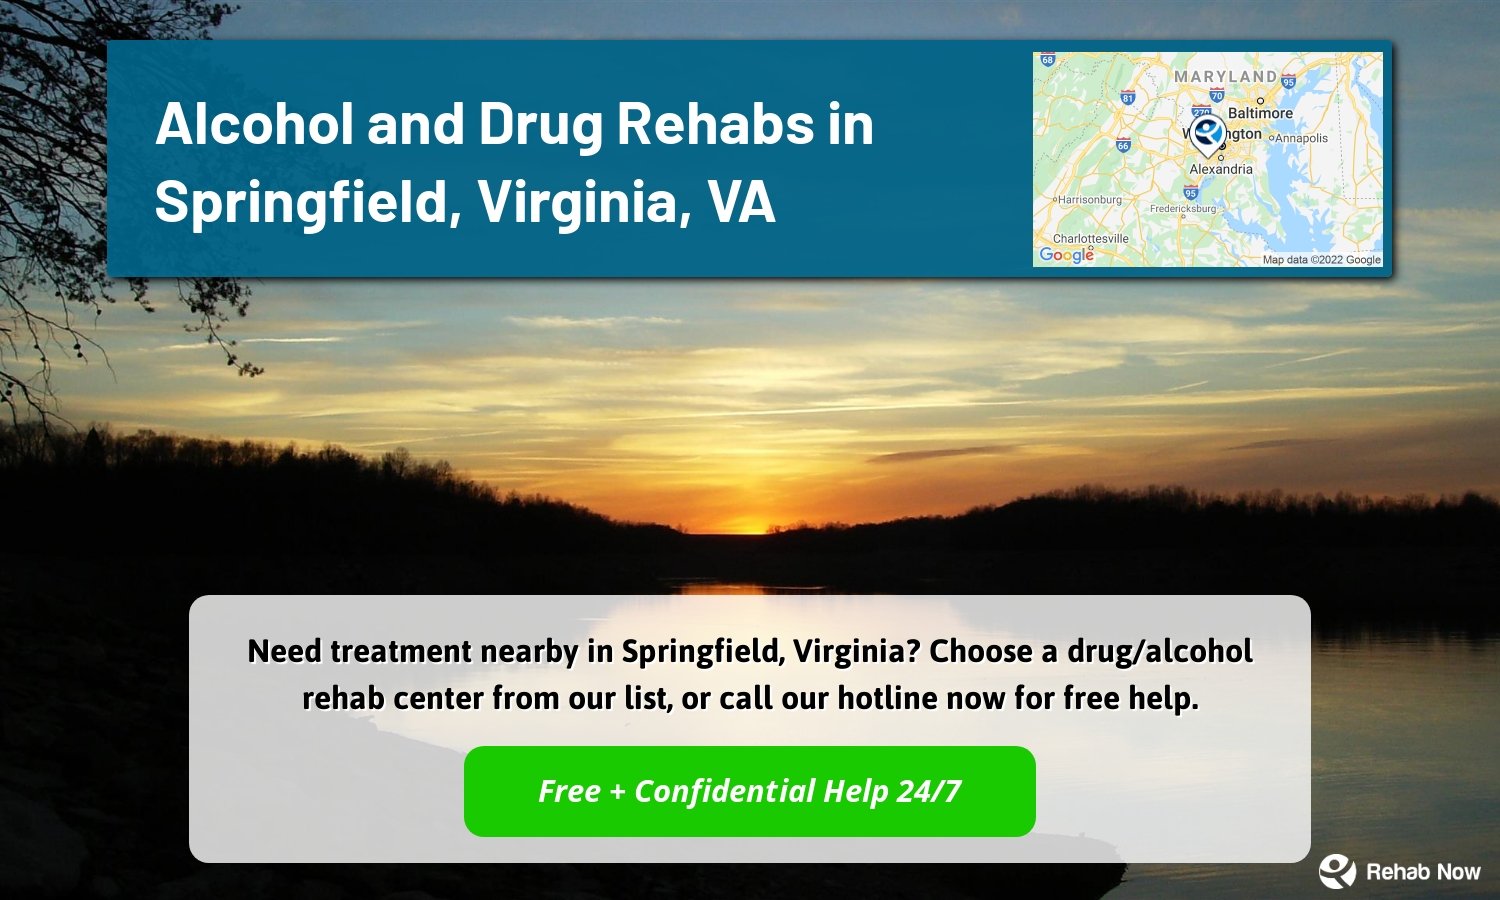 Need treatment nearby in Springfield, Virginia? Choose a drug/alcohol rehab center from our list, or call our hotline now for free help.